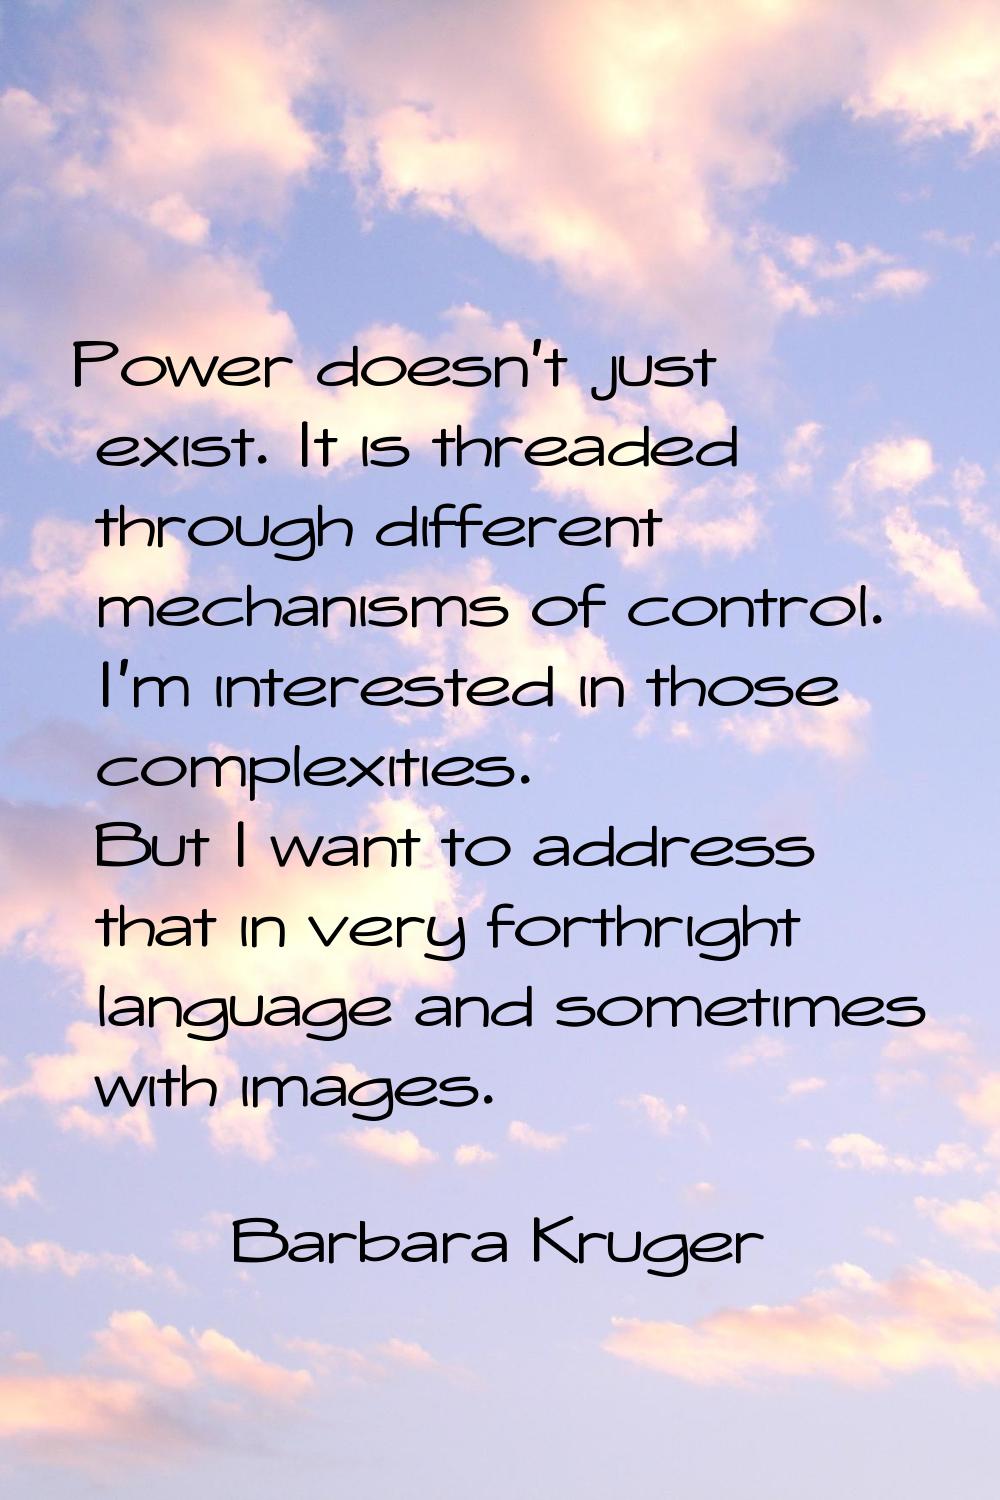 Power doesn't just exist. It is threaded through different mechanisms of control. I'm interested in